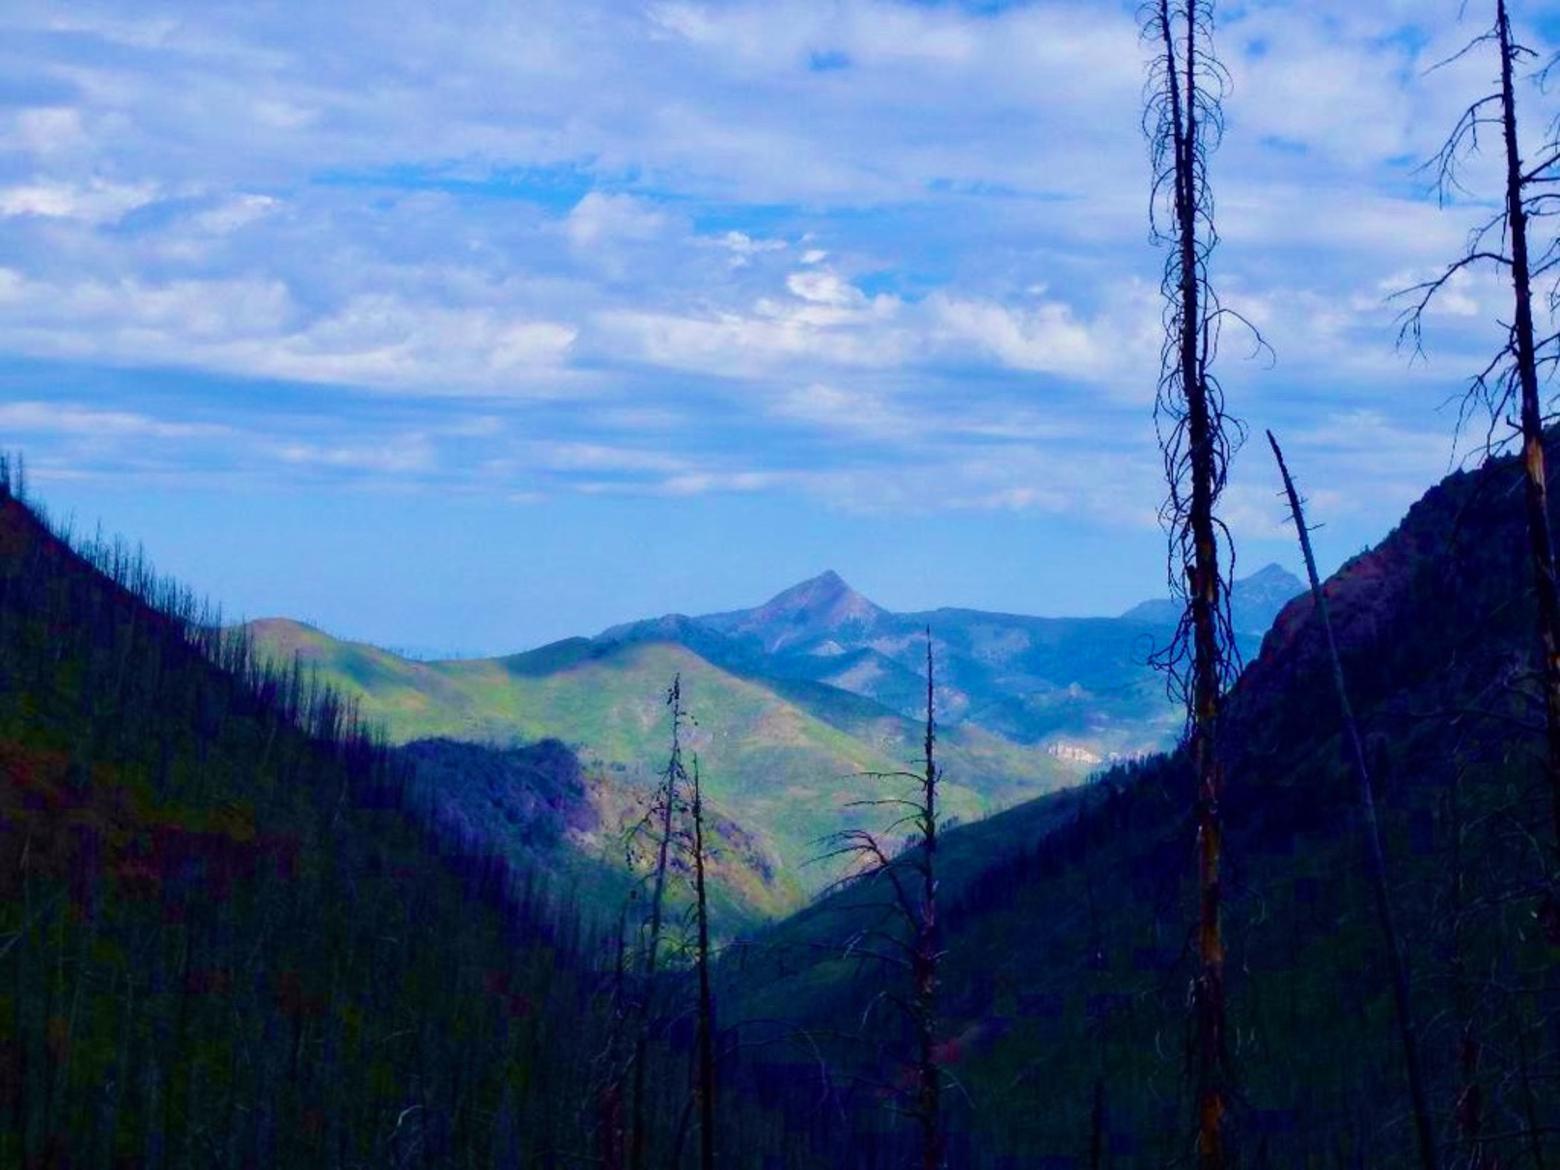 Beyond: the internationally-recognized Absaroka-Beartooth Wilderness that functions as a key piece of landscape protection for wildlife moving in and out of Yellowstone National Park and providing slow-paced solitude to humans. Photo courtesy Jesse Logan